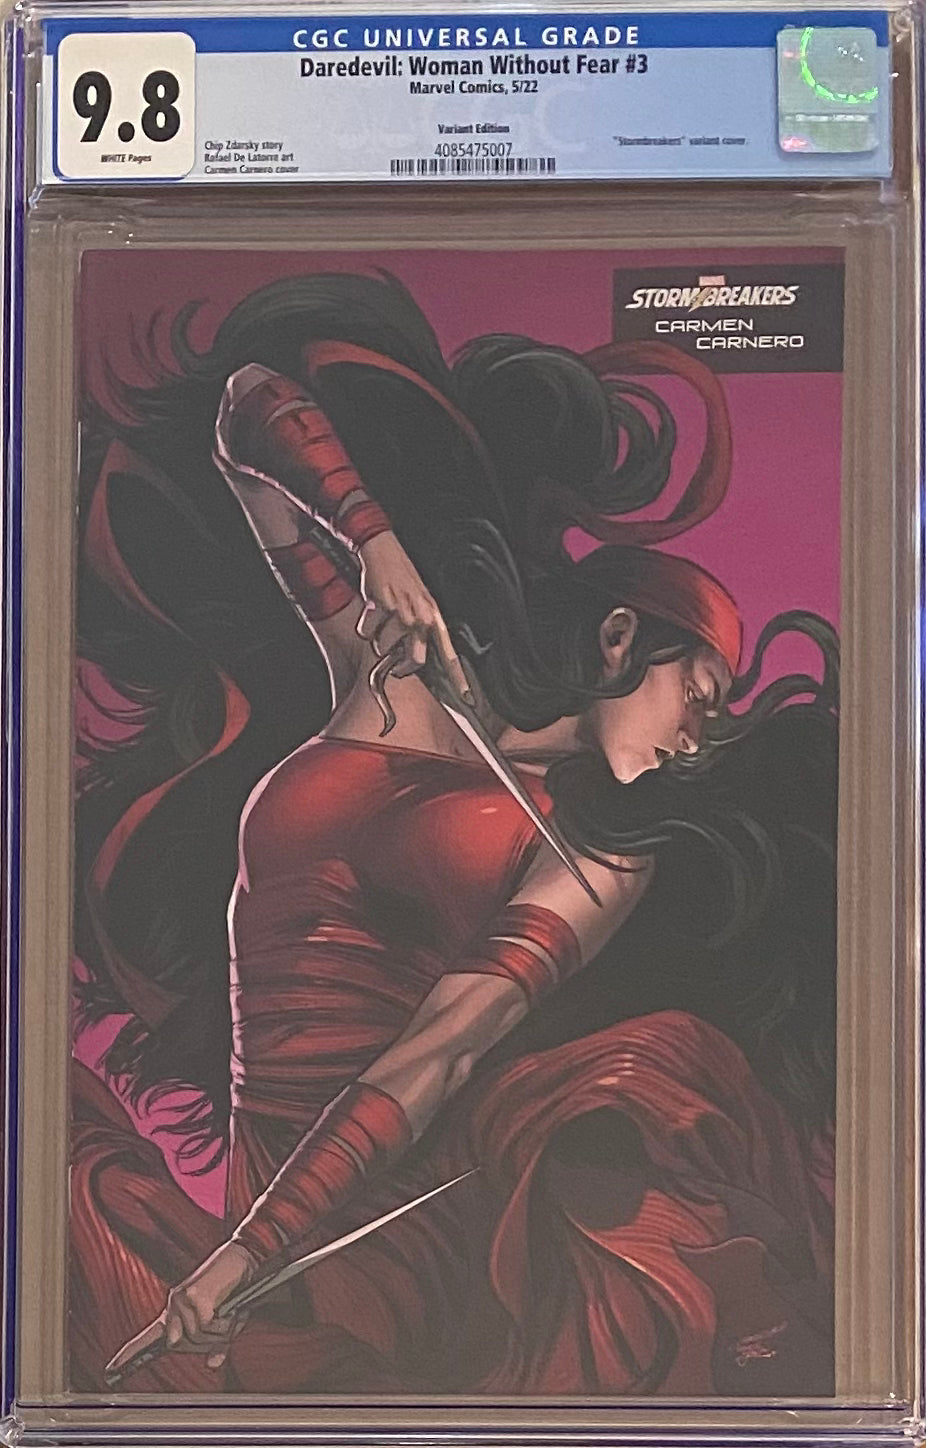 Daredevil: Woman Without Fear #3 Variant CGC 9.8